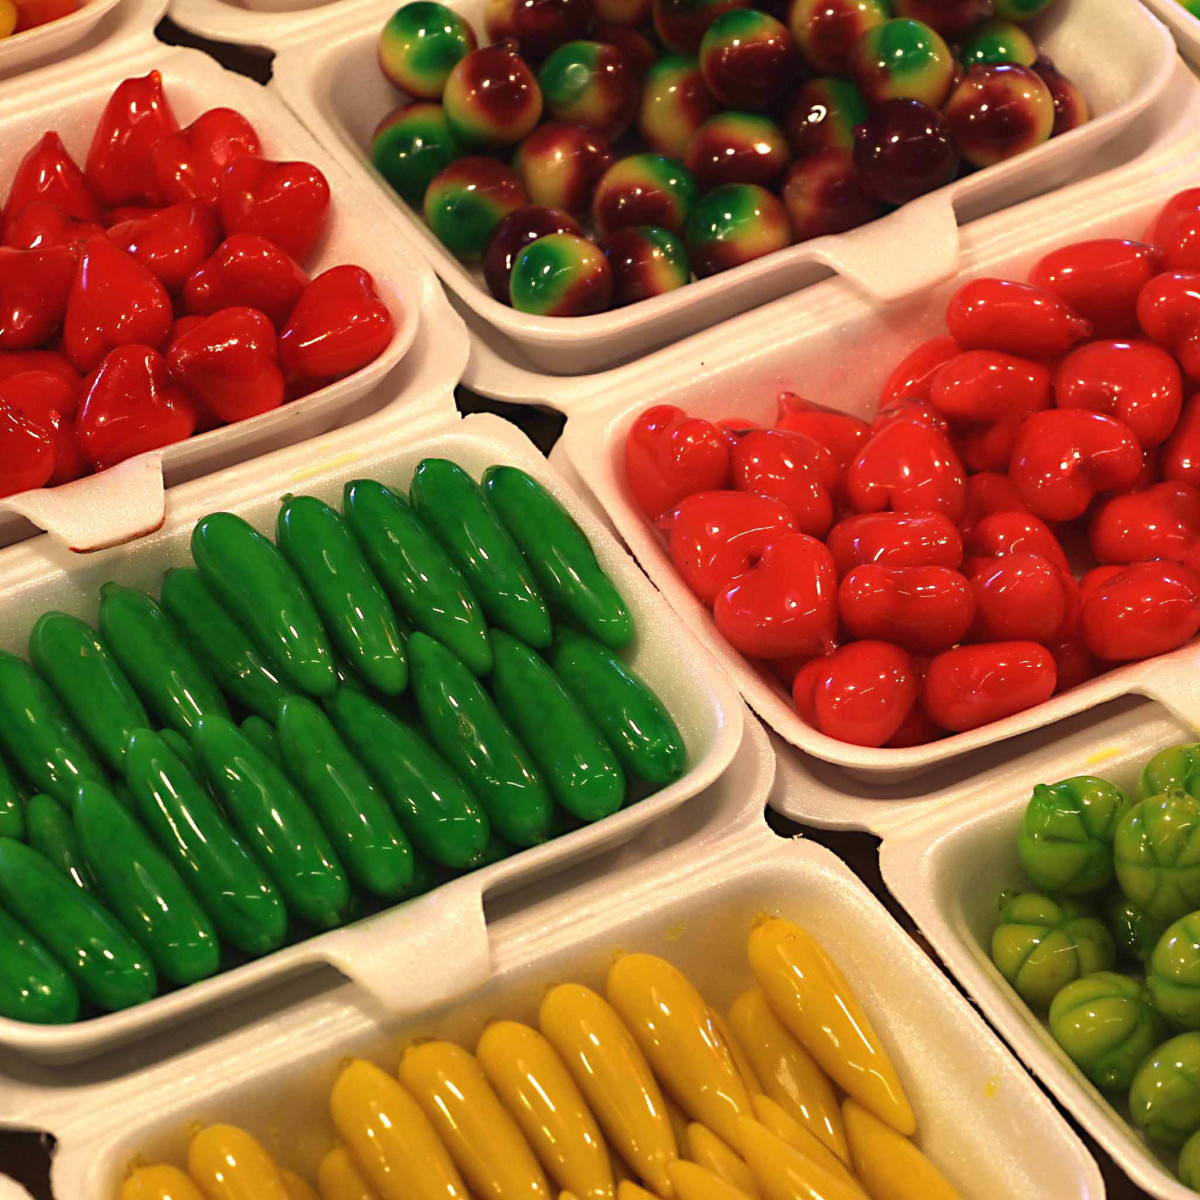 'Look Choup' sweets which imitate fruits both familar and unfamiliar 